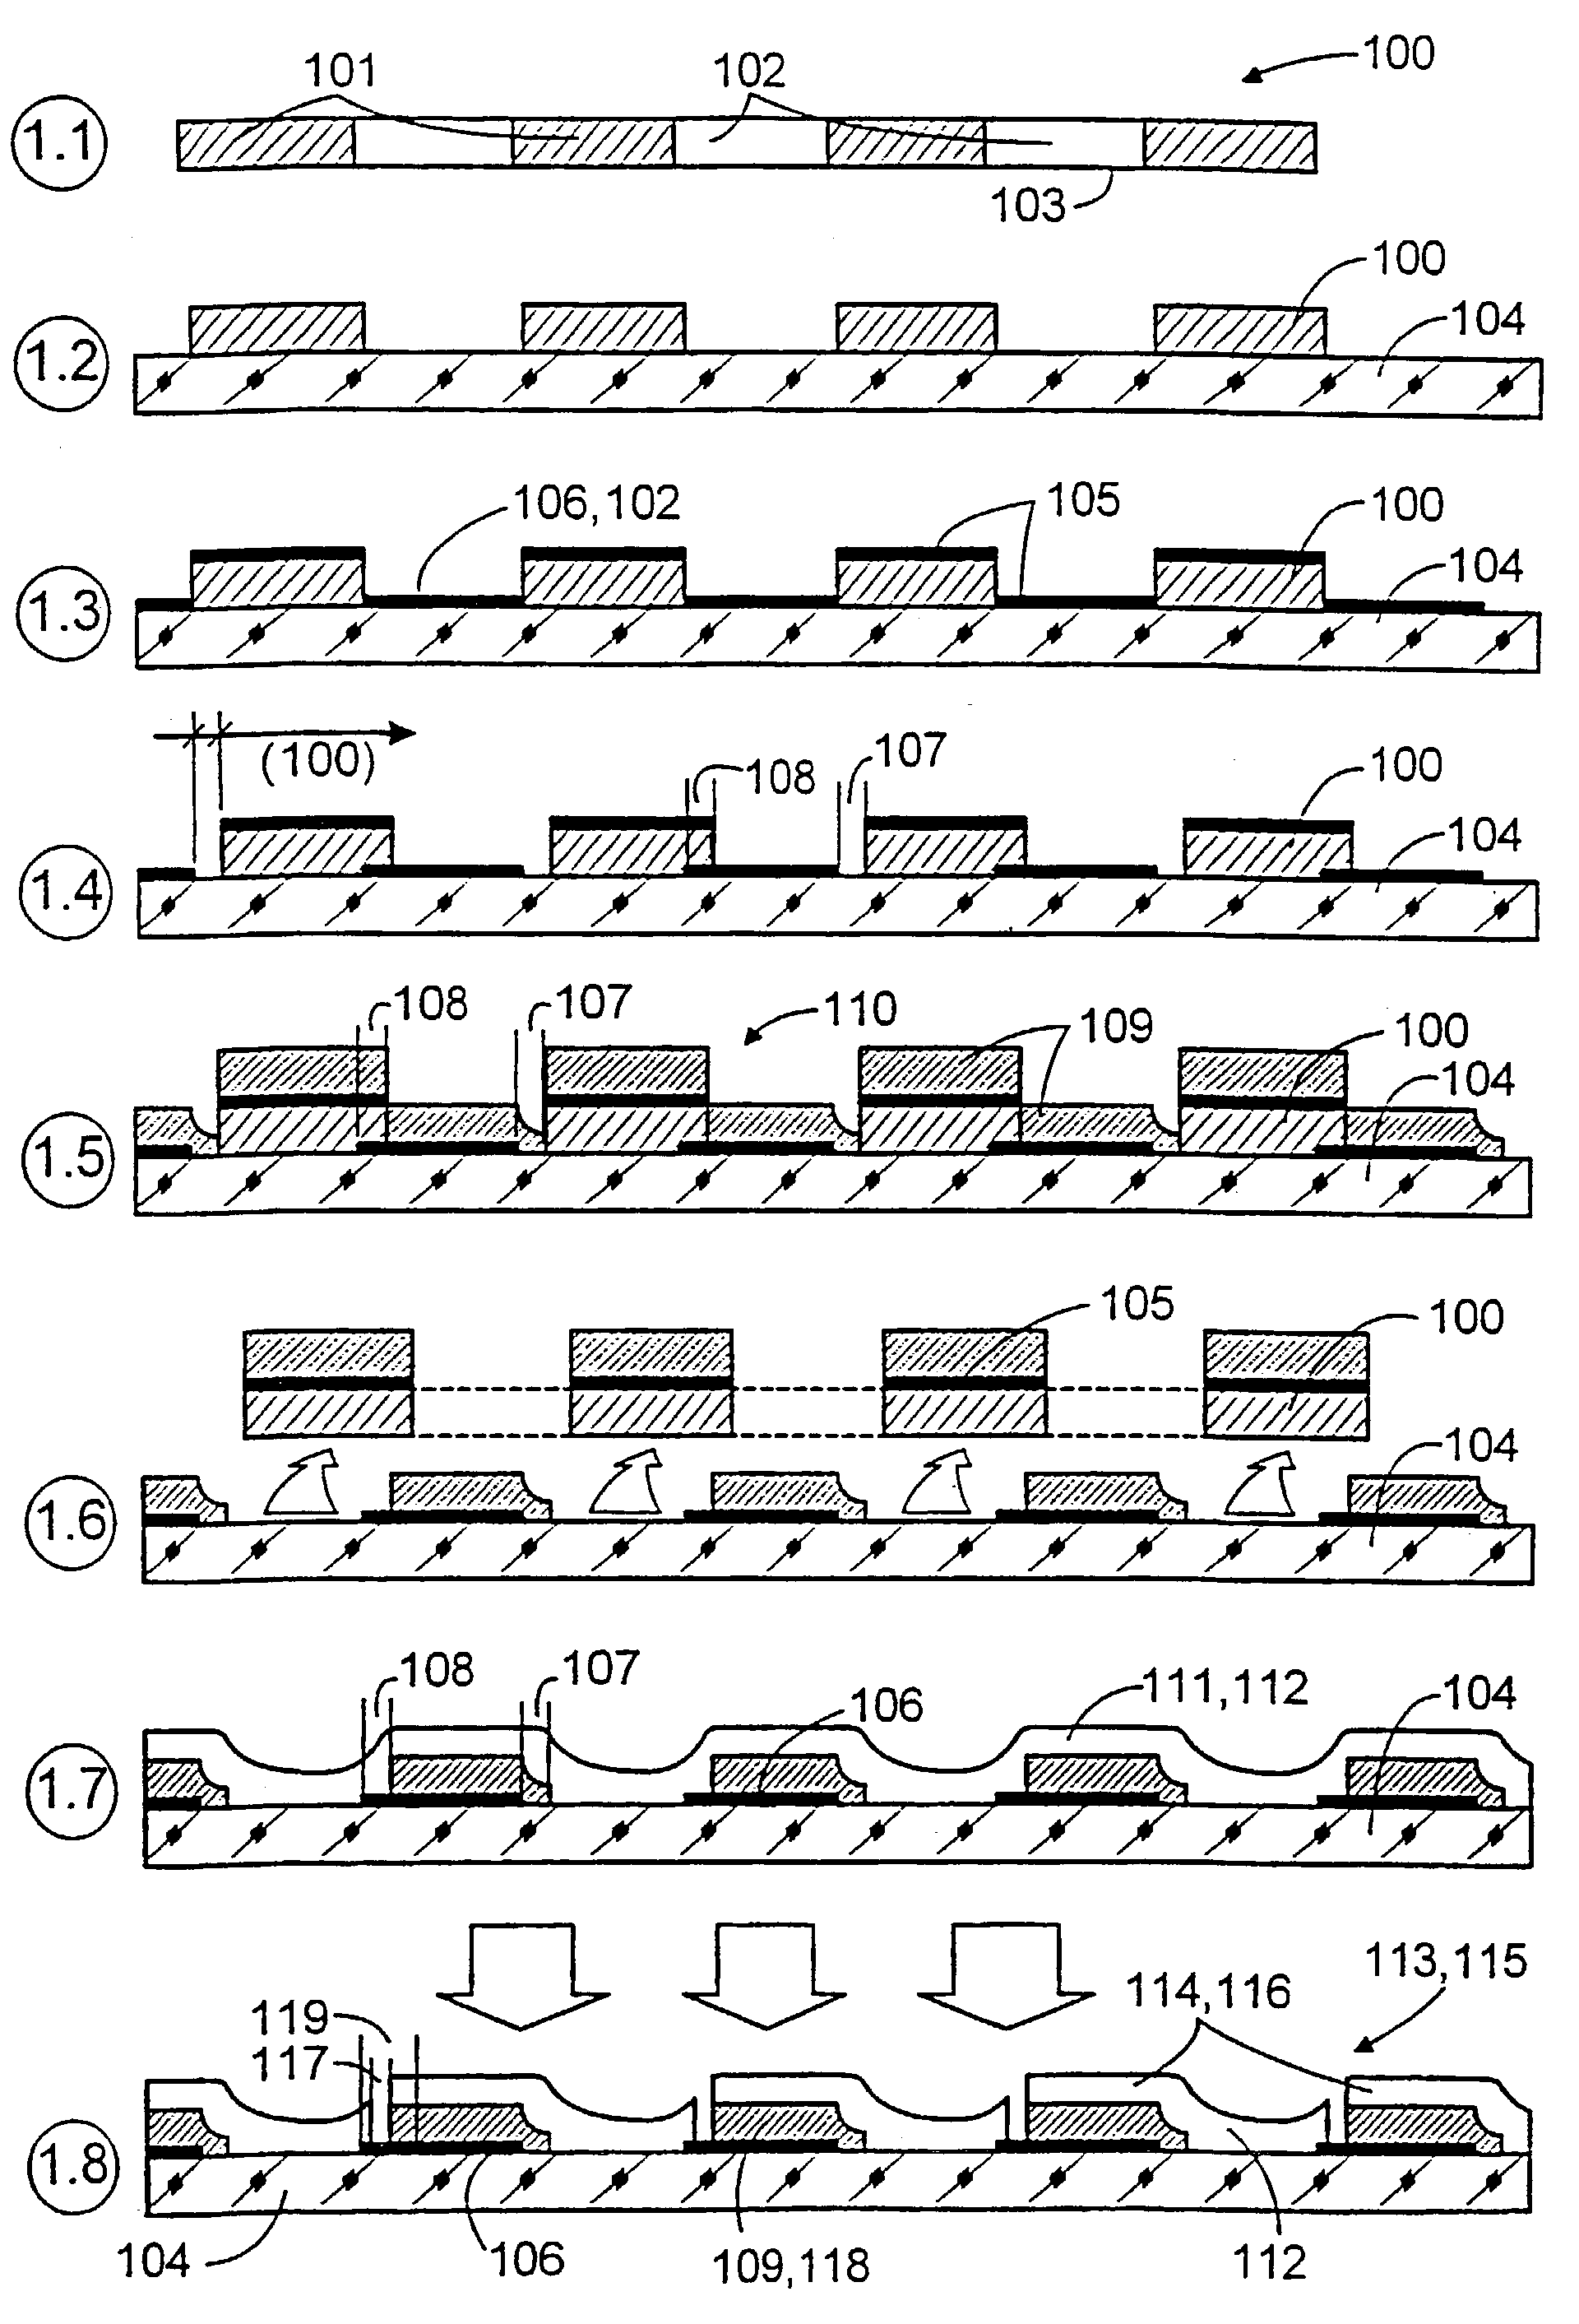 Method for producing a solar module with thin-film solar cells which are series-connected in an integrated manner and solar modules produced according to the method, especially using concentrator modules